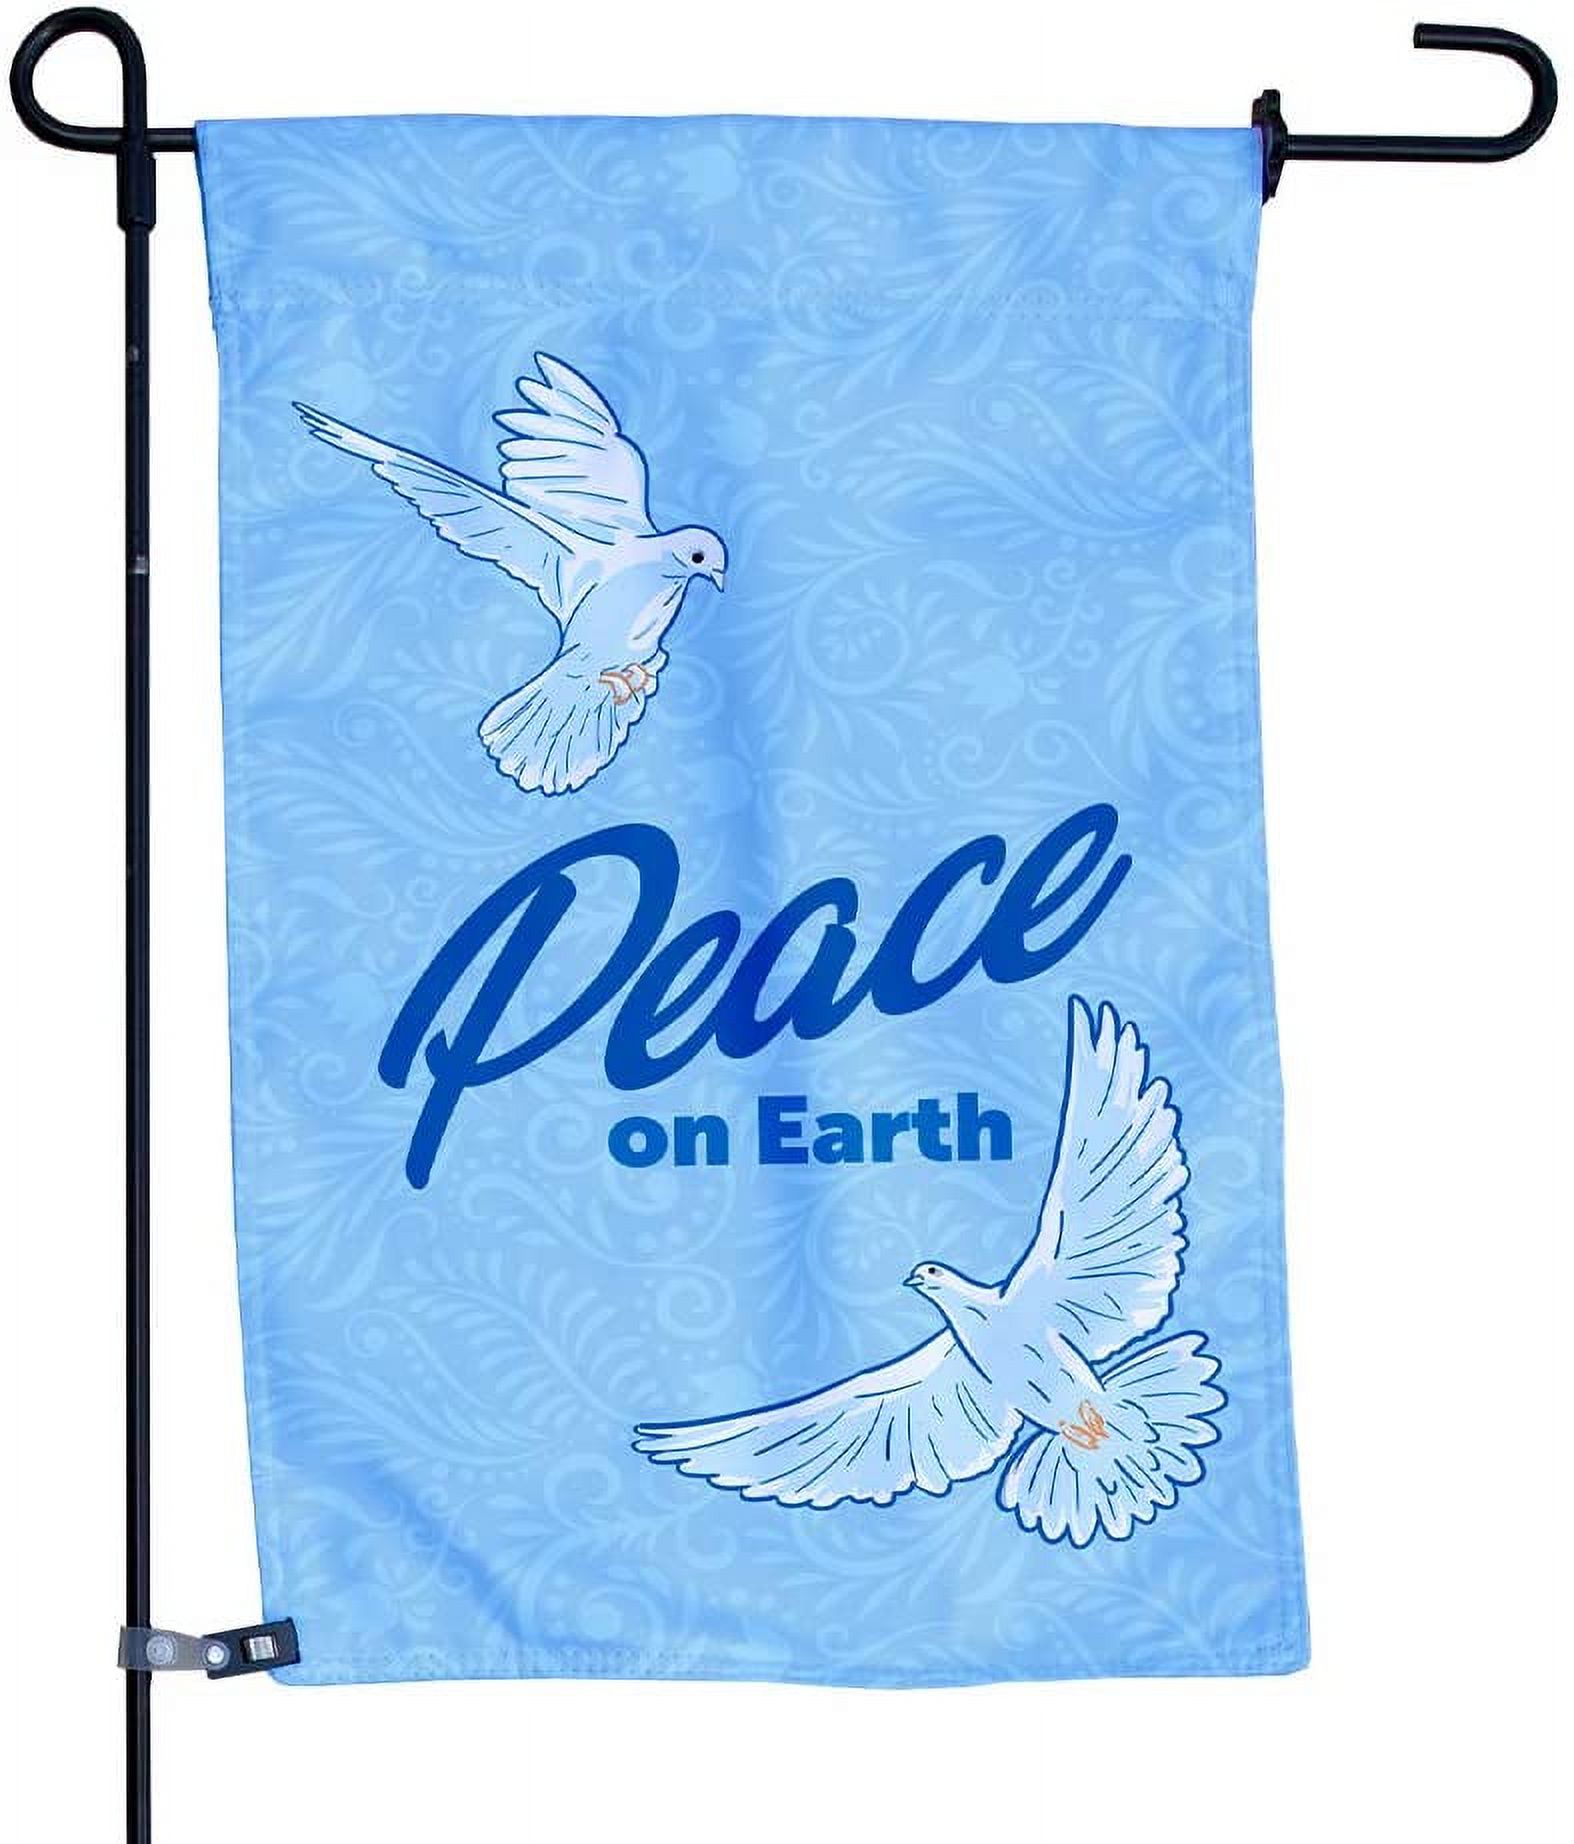 Peace on Earth Garden Flag, Double-Sided Outdoor Garden Flag and Flagpole, Decorative Flag for Homes, Yards, and Gardens, 12 x 18 Inch Flag with 36 Inch Flagpole - image 1 of 6